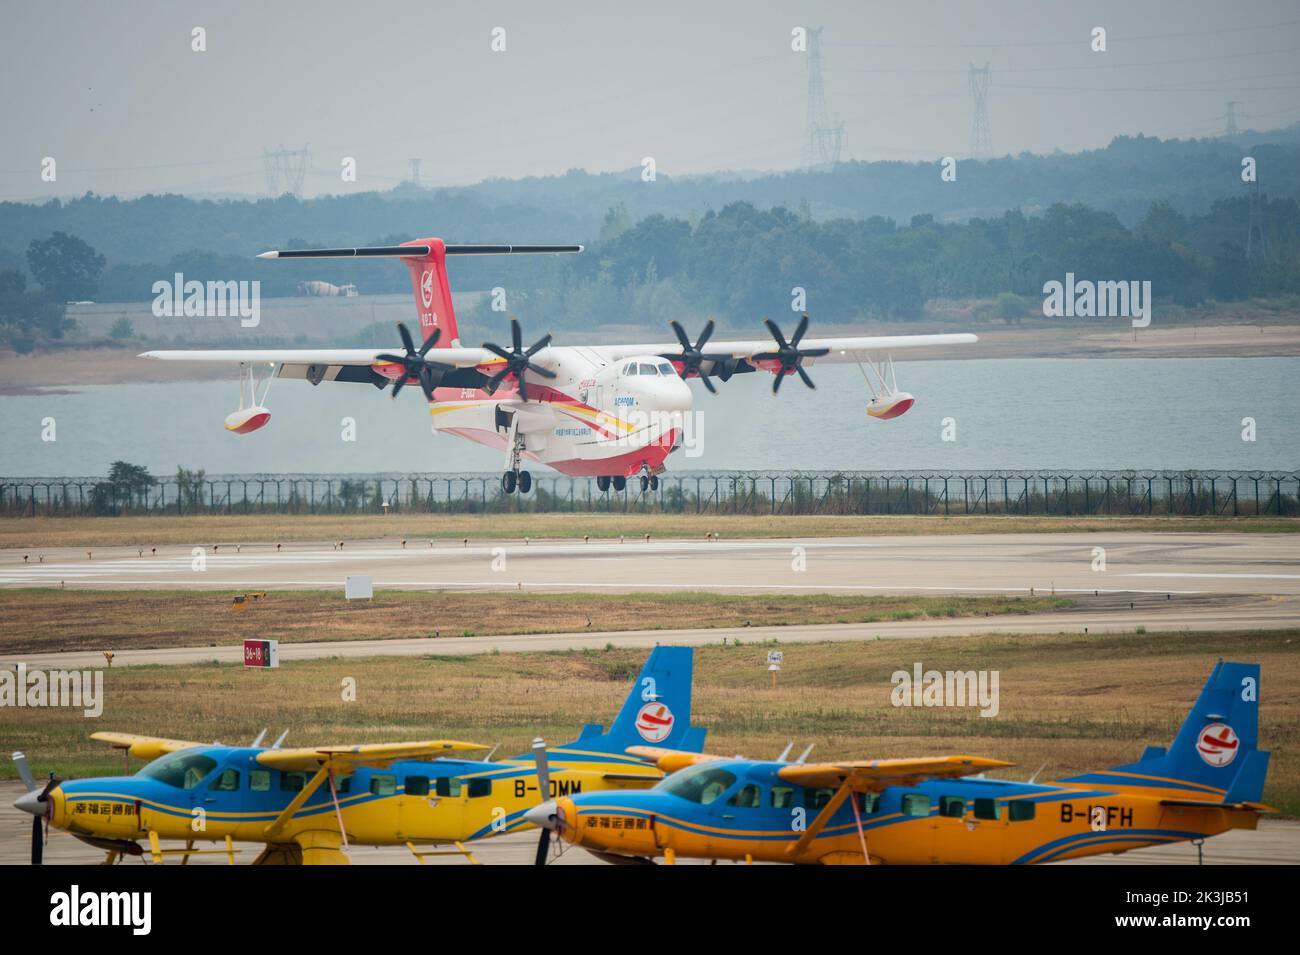 (220927) -- JINGMEN, Sept. 27, 2022 (Xinhua) -- An AG600M firefighting aircraft lands at Zhanghe Airport during a gathering and dropping water test in Jingmen, central China's Hubei Province, Sept. 27, 2022. Codenamed Kunlong, the AG600 large amphibious aircraft family is seen as key aeronautical equipment for China's emergency-rescue system. It was developed by the Aviation Industry Corporation of China (AVIC), the country's leading plane-maker, to meet the needs of firefighting and marine-rescue missions, as well as other critical emergency-rescue operations. (Xinhua/Wu Zhizun) Stock Photo